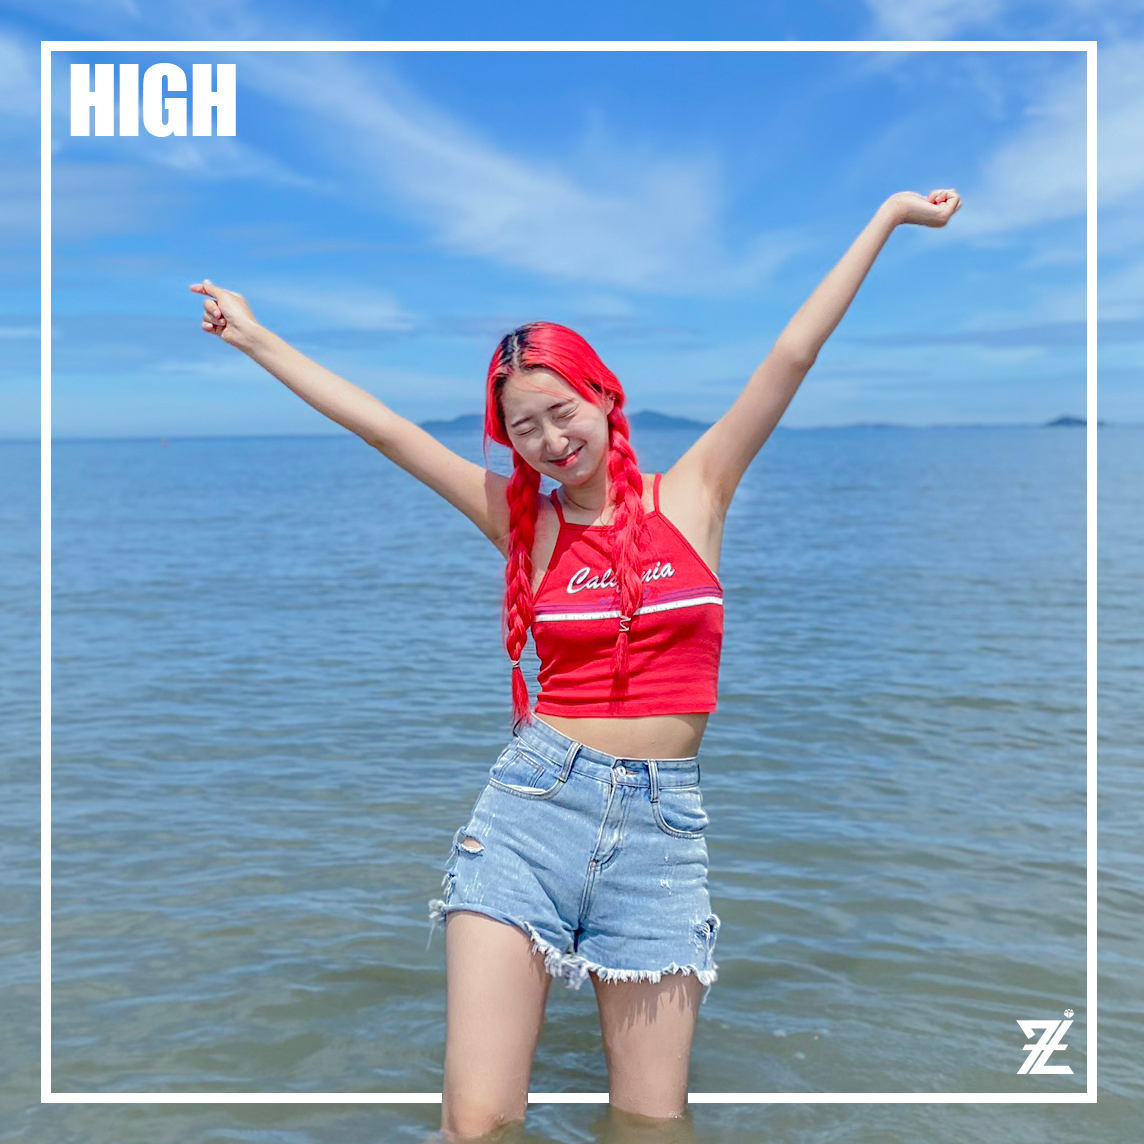 https://static.wikia.nocookie.net/kpop/images/c/c2/HitGirlz_High_High%27s_Summer_Ver.2_profile_photo_%281%29.png/revision/latest?cb=20220624153114